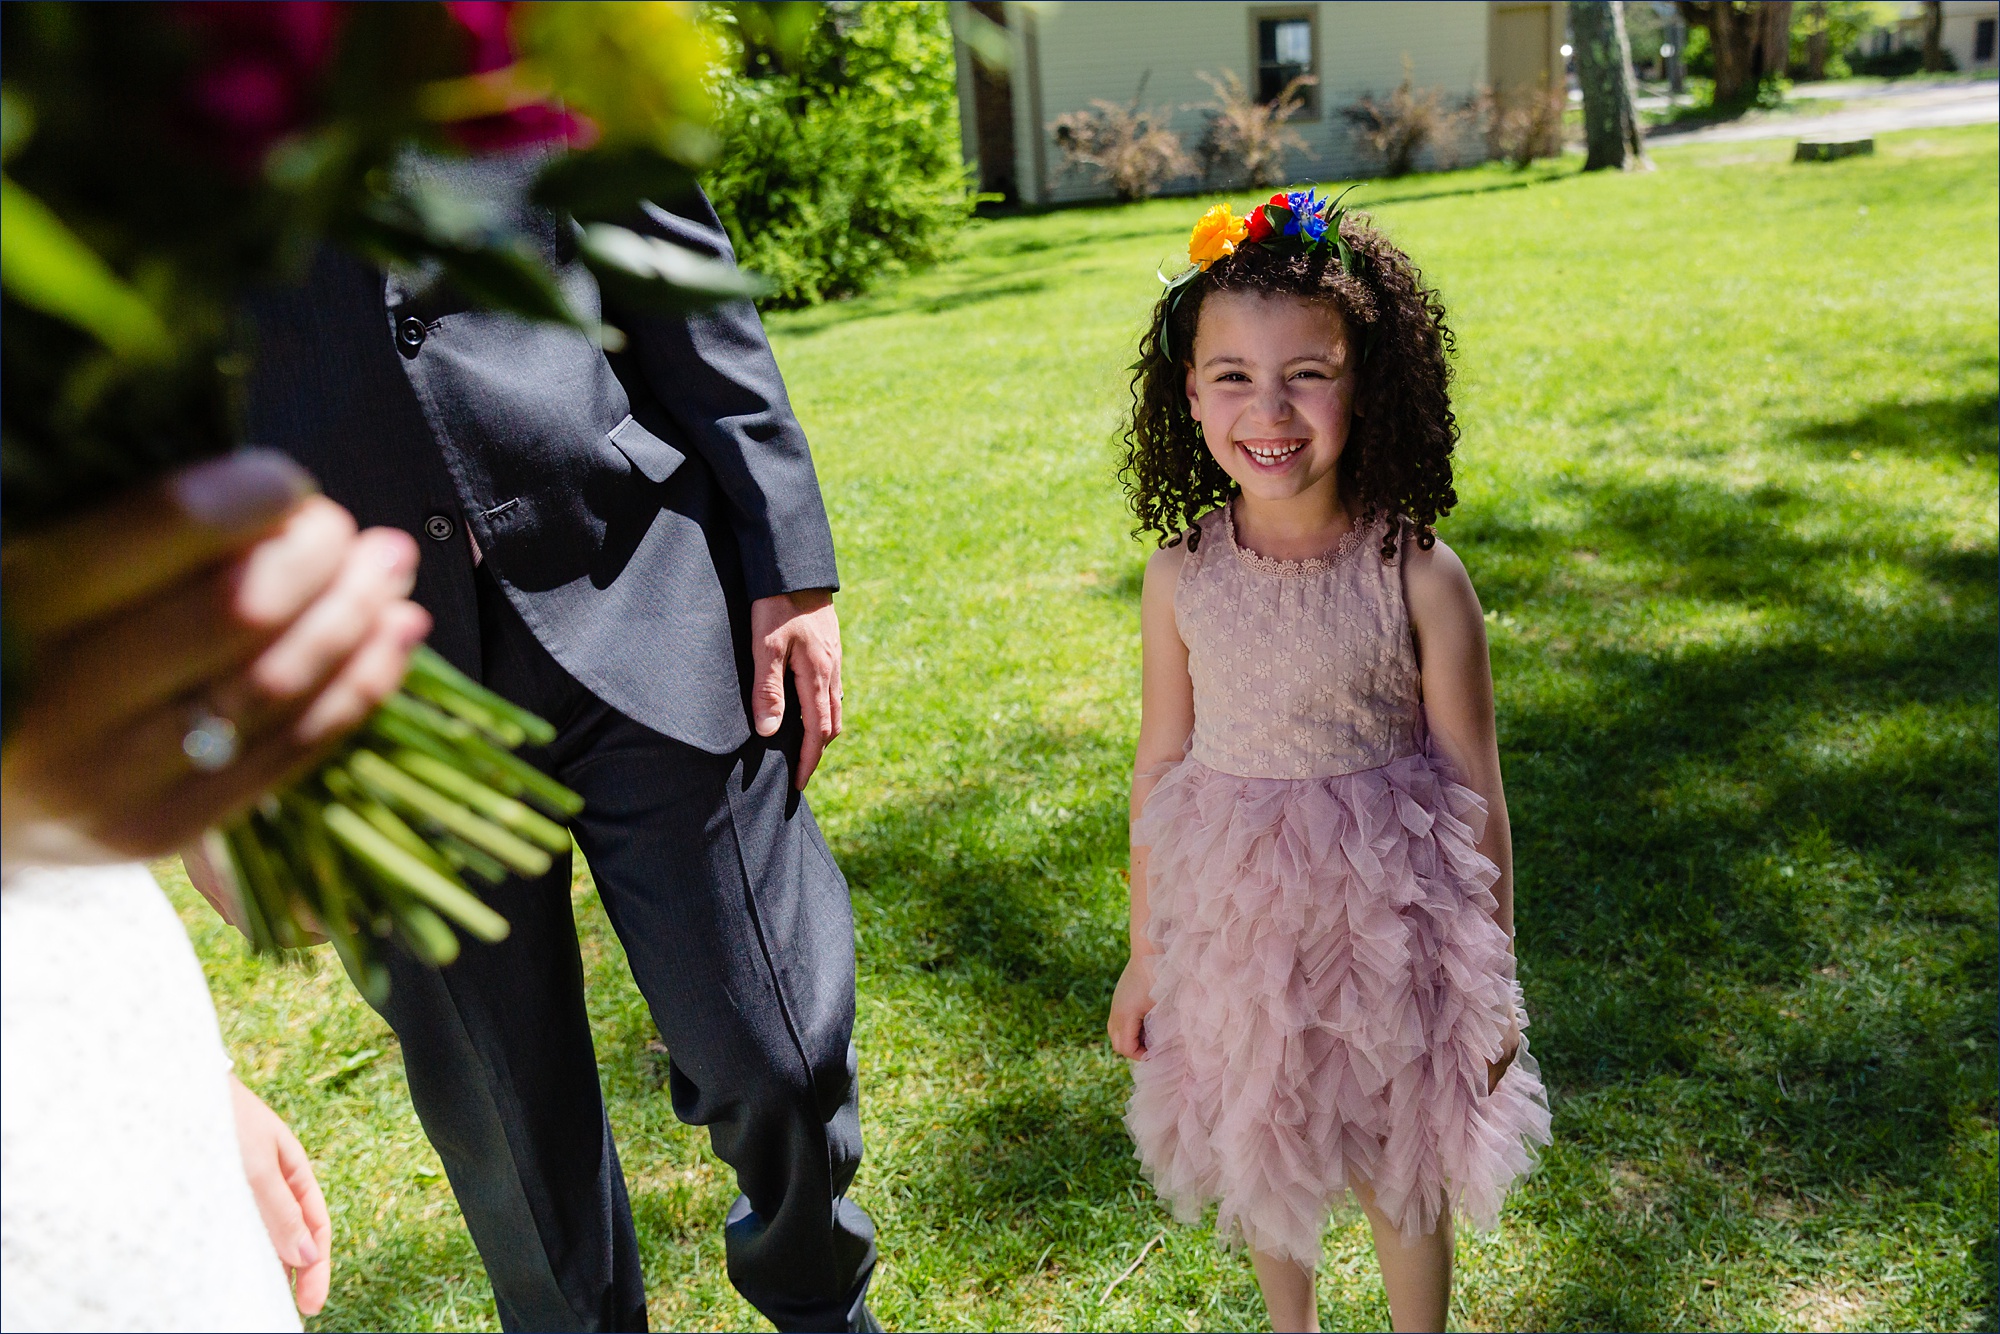 The flower girl smiles big after the outdoor wedding ceremony